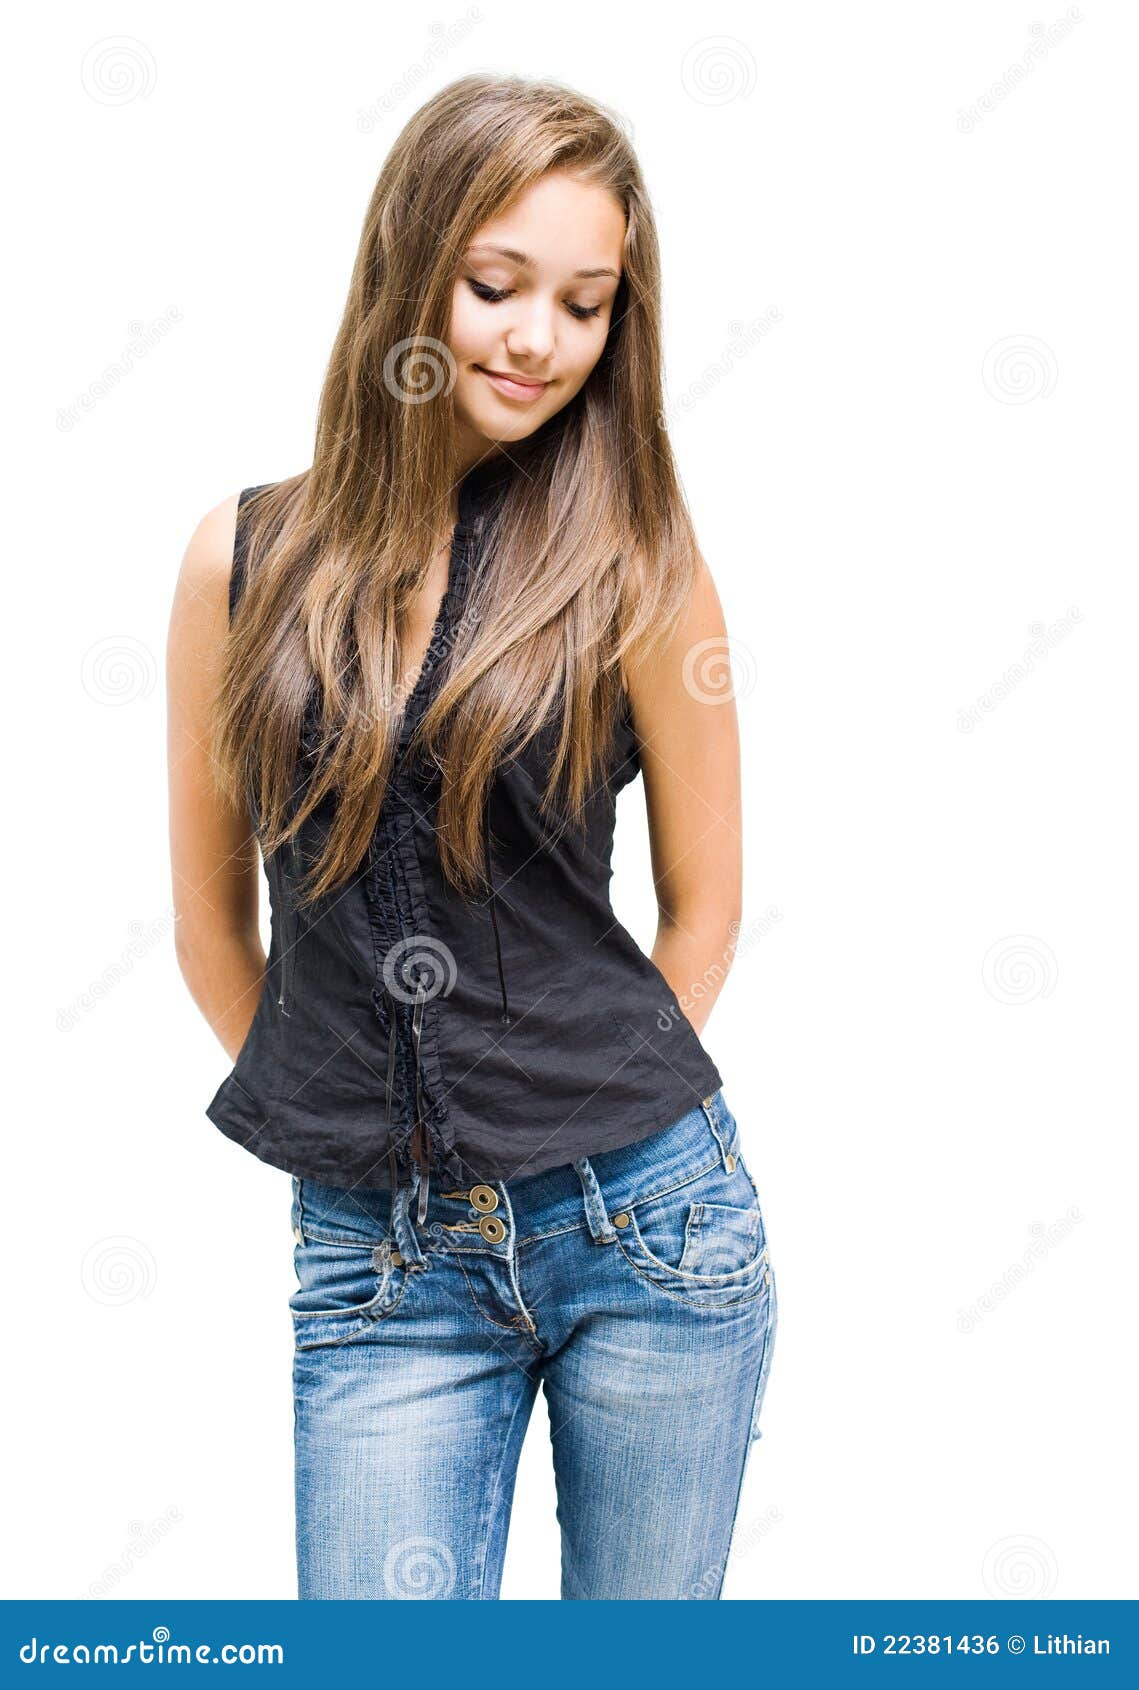 Shy Young Brunette Girl Royalty Free Stock Image I